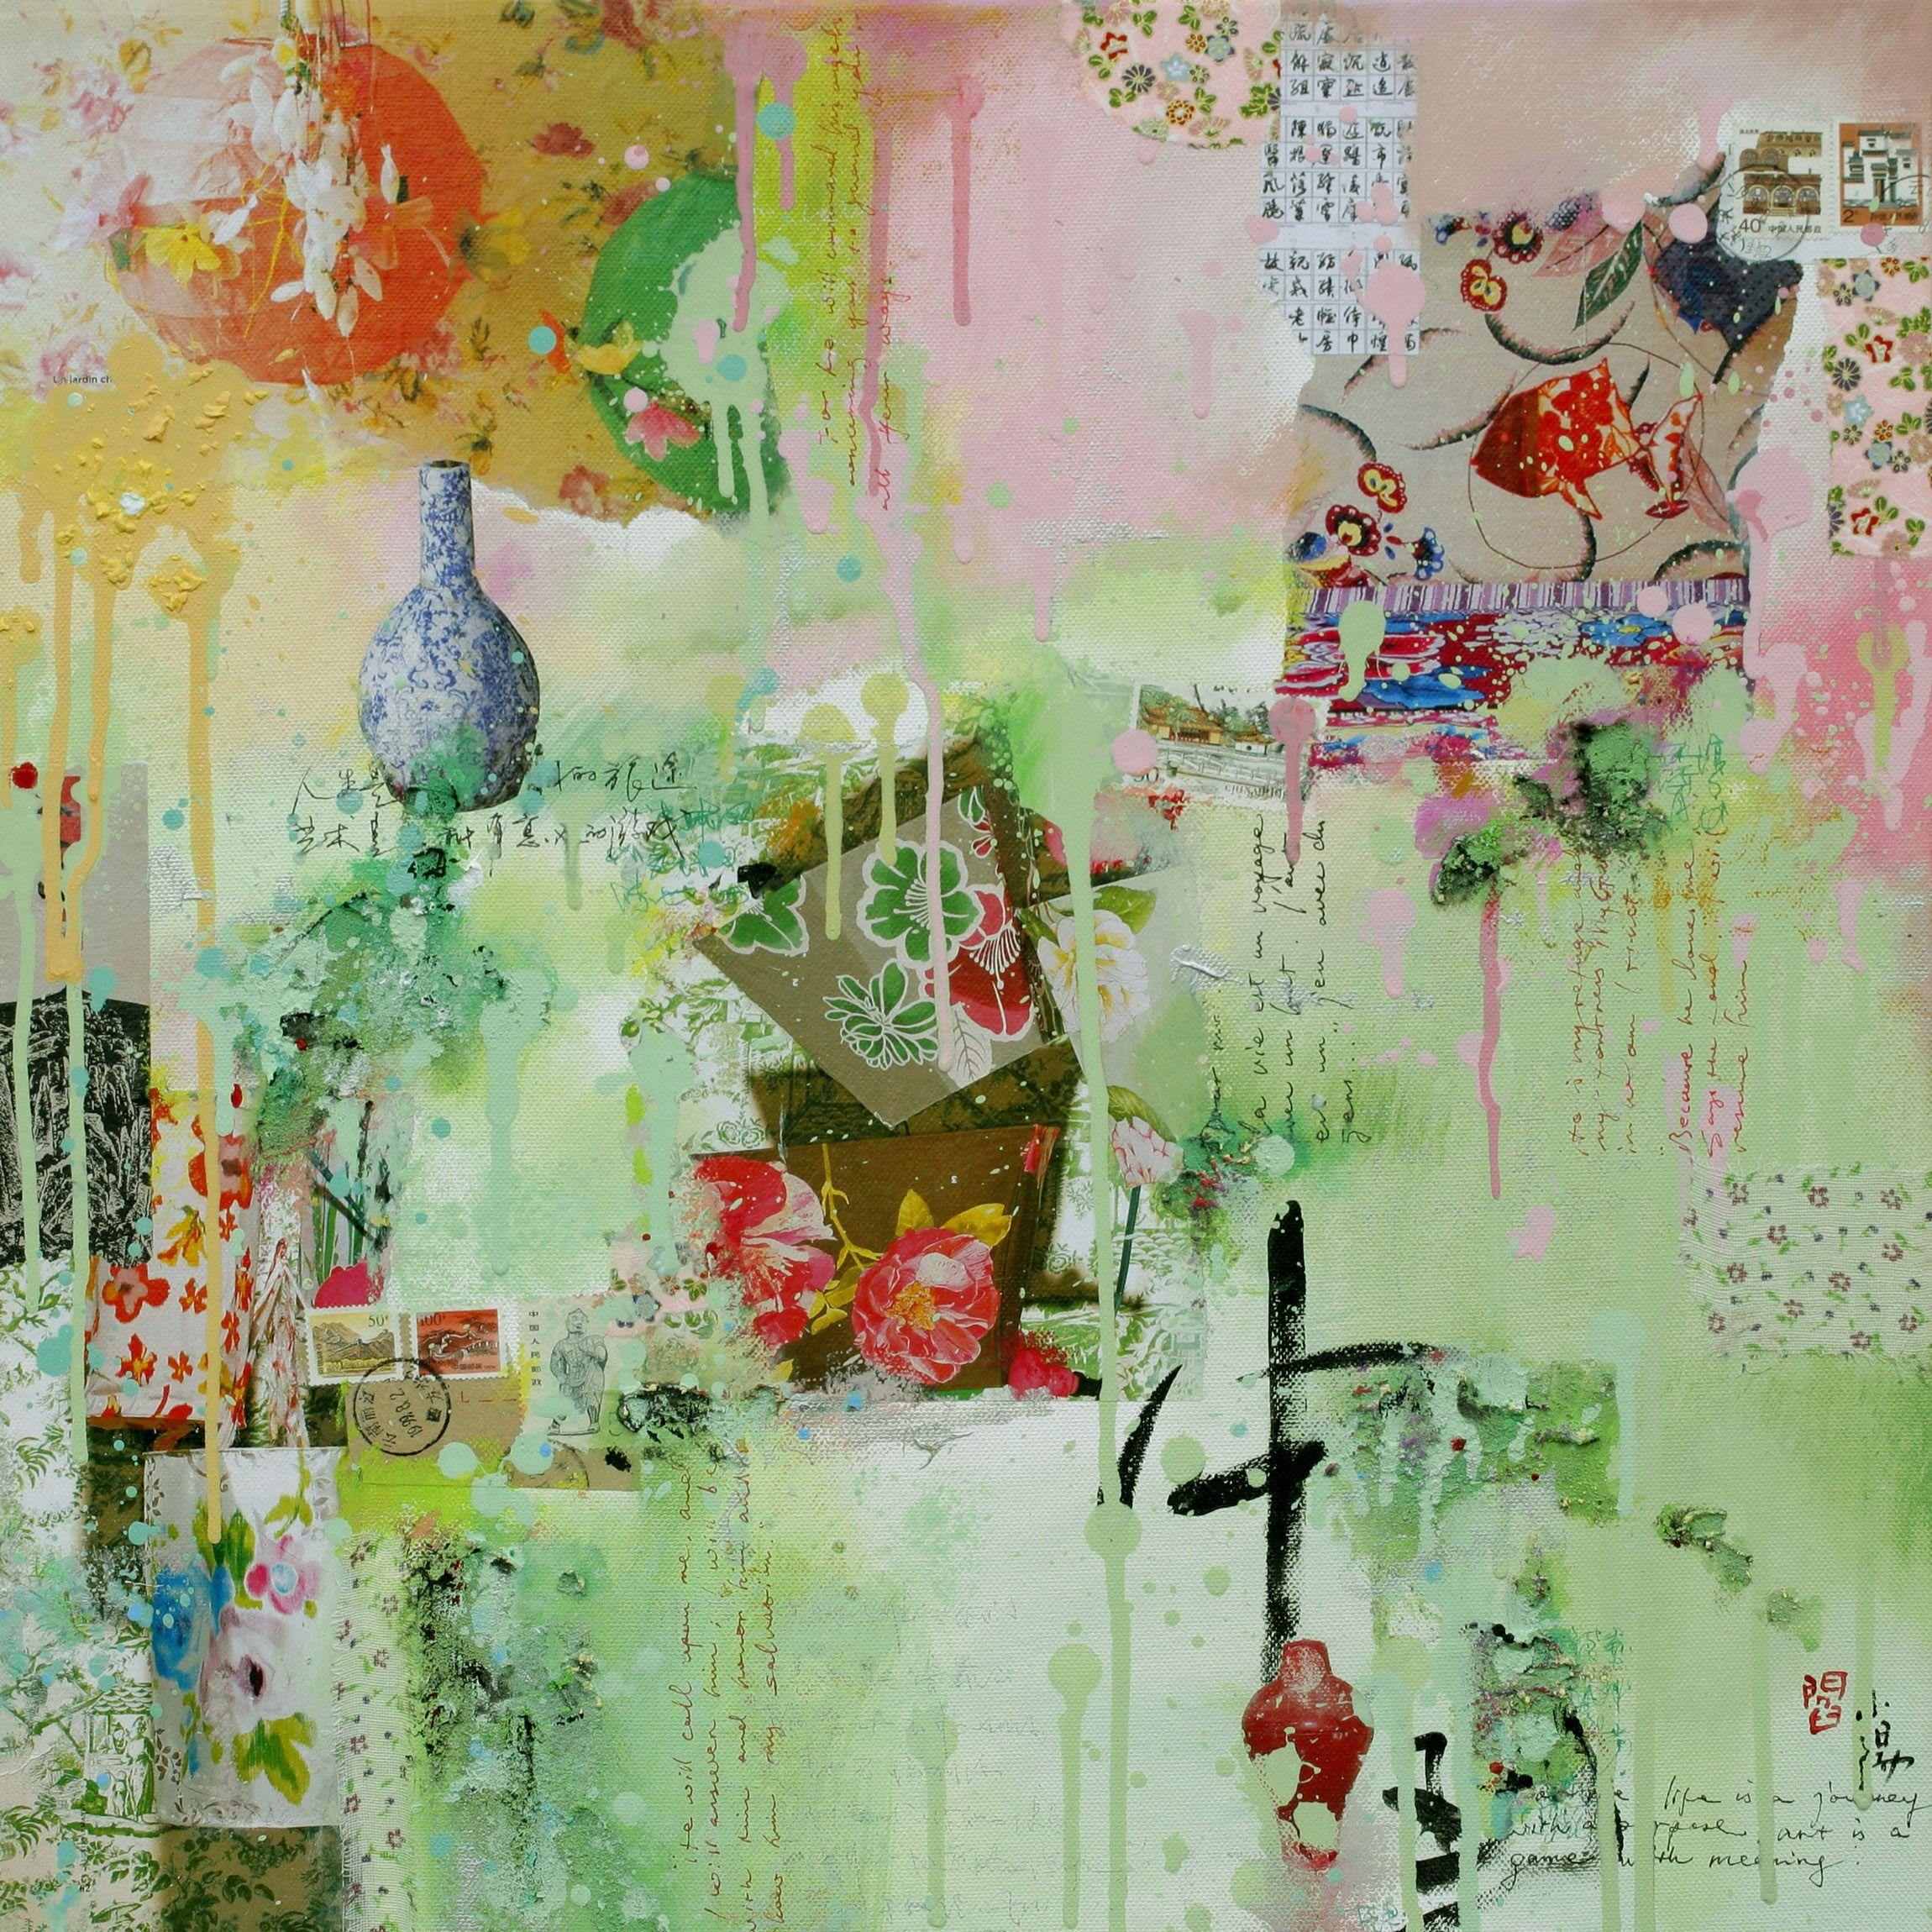 Xiaoyang Galas Abstract Print - Jardin chinois - Fine art giclÃCe print, Digital on Watercolor Paper